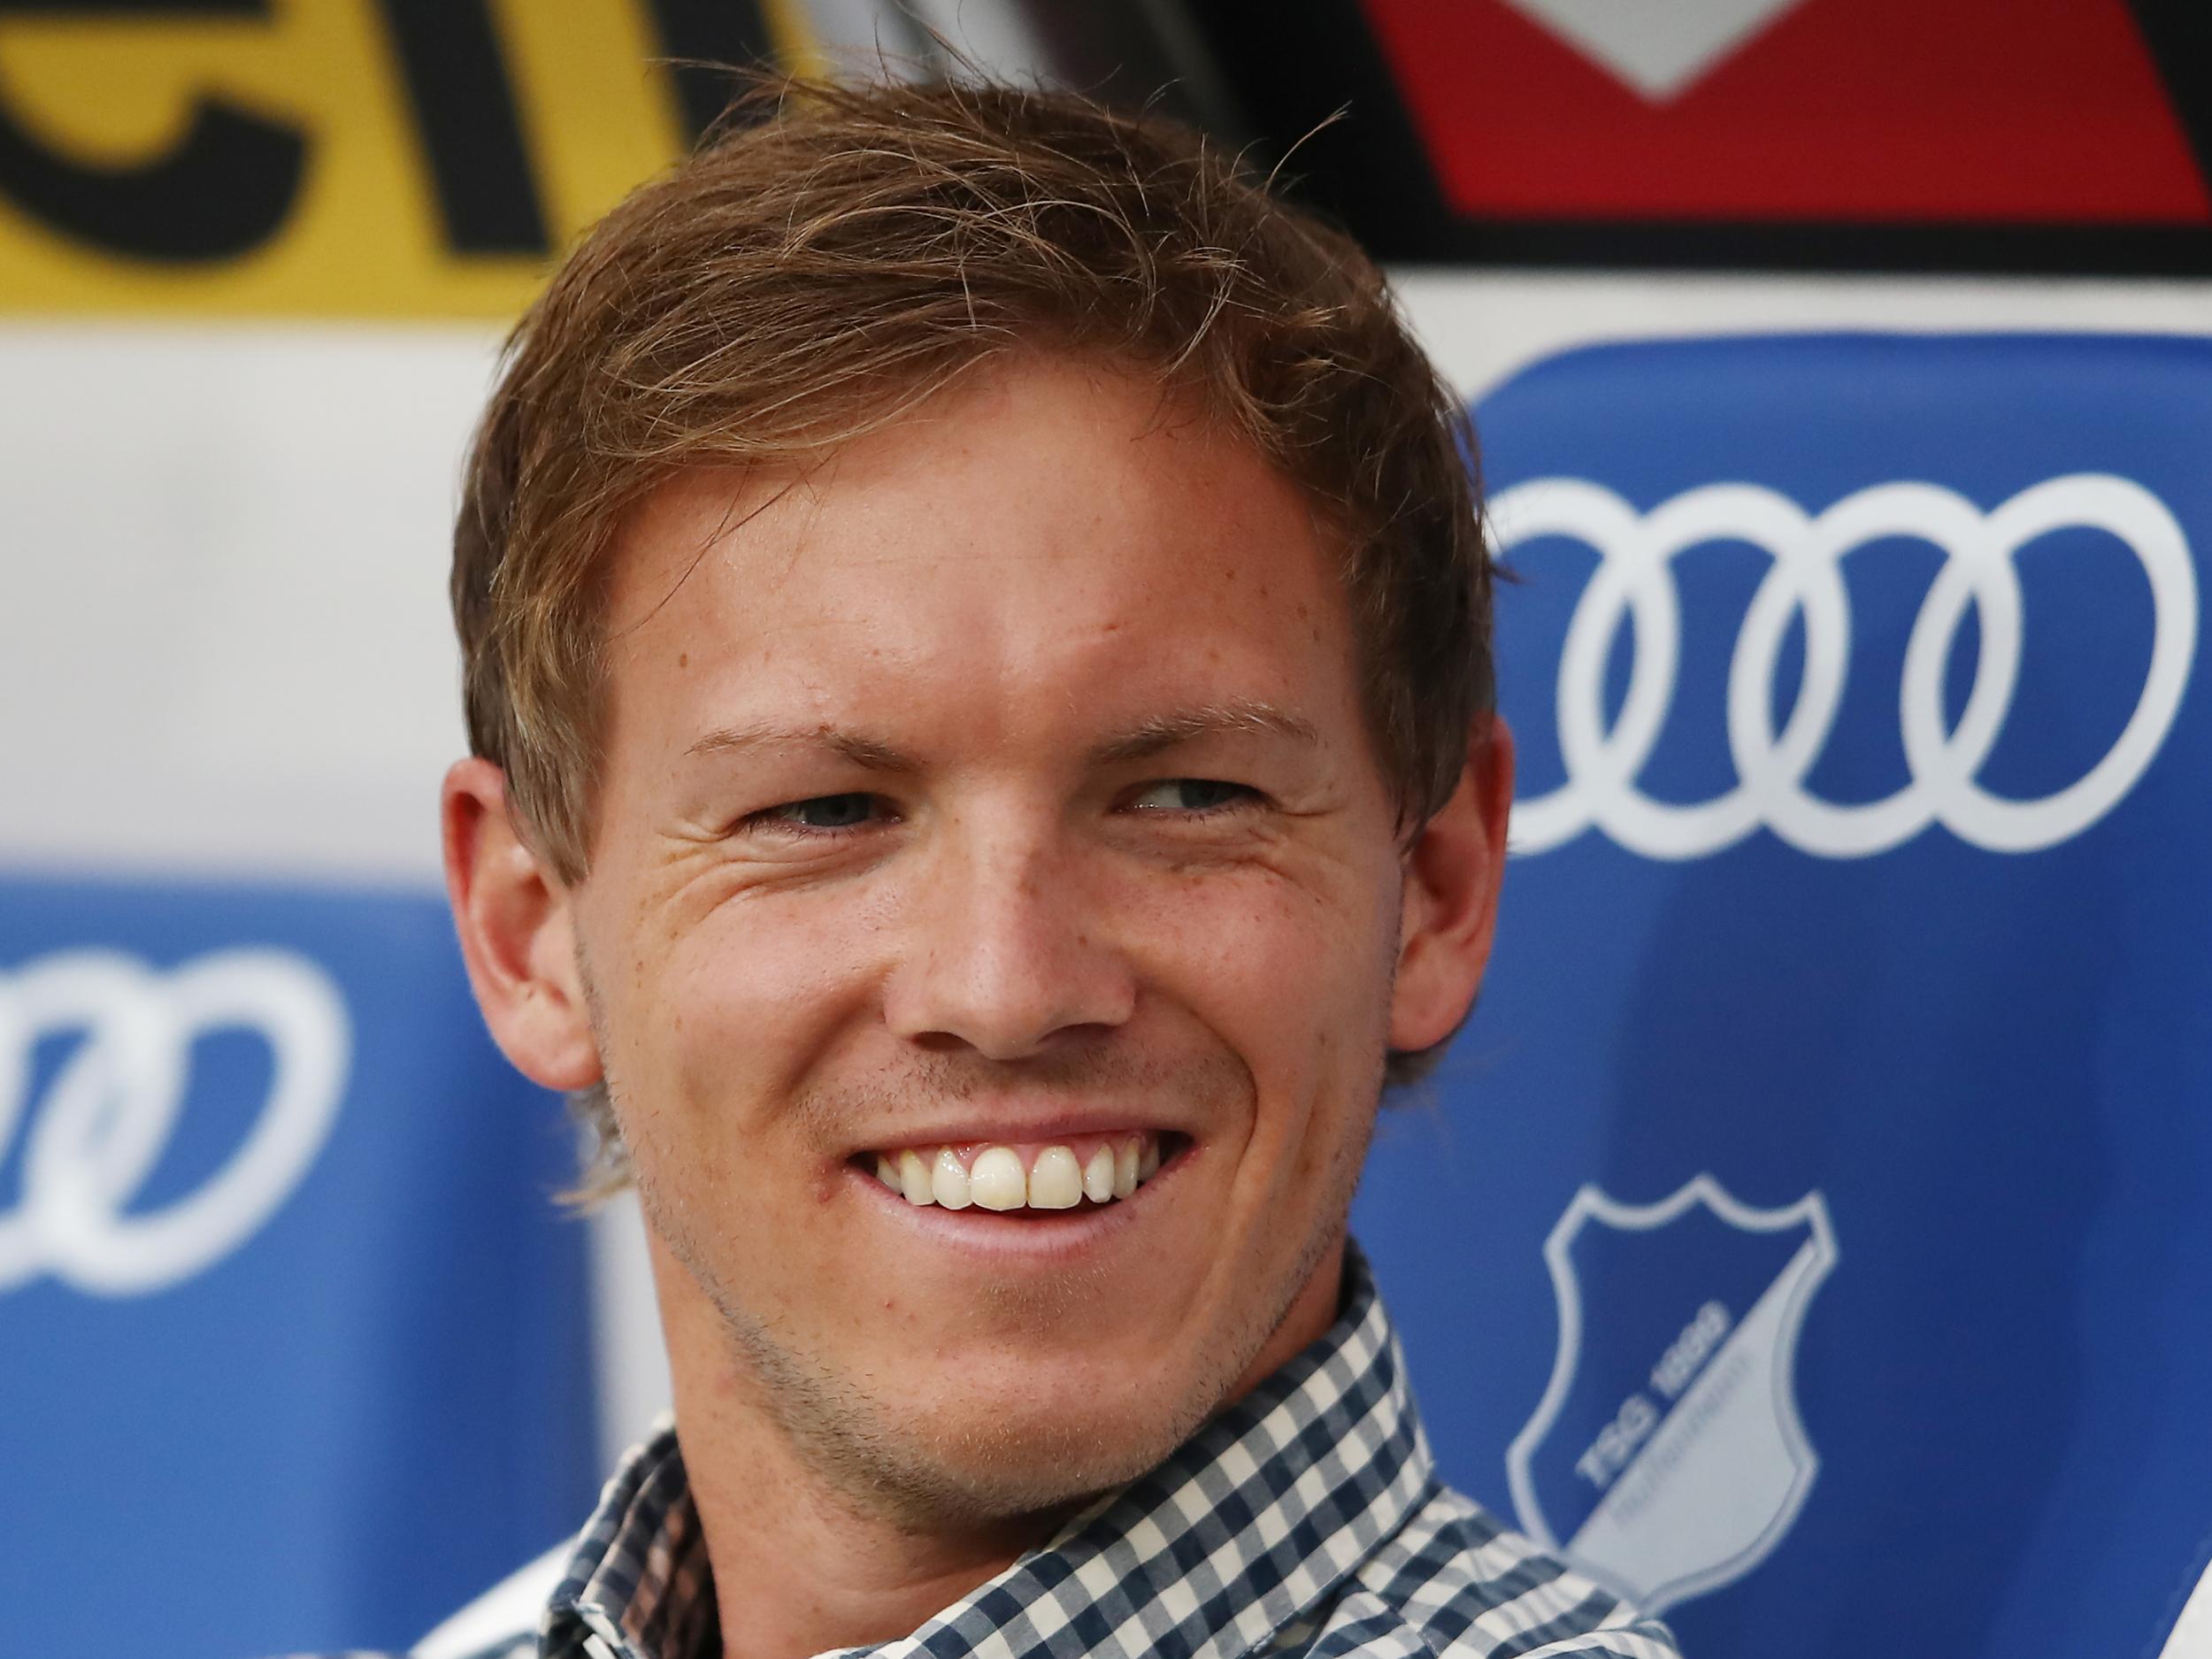 Julian Nagelsmann beat Carlo Ancelotti's side on Saturday - and now he's going after his job